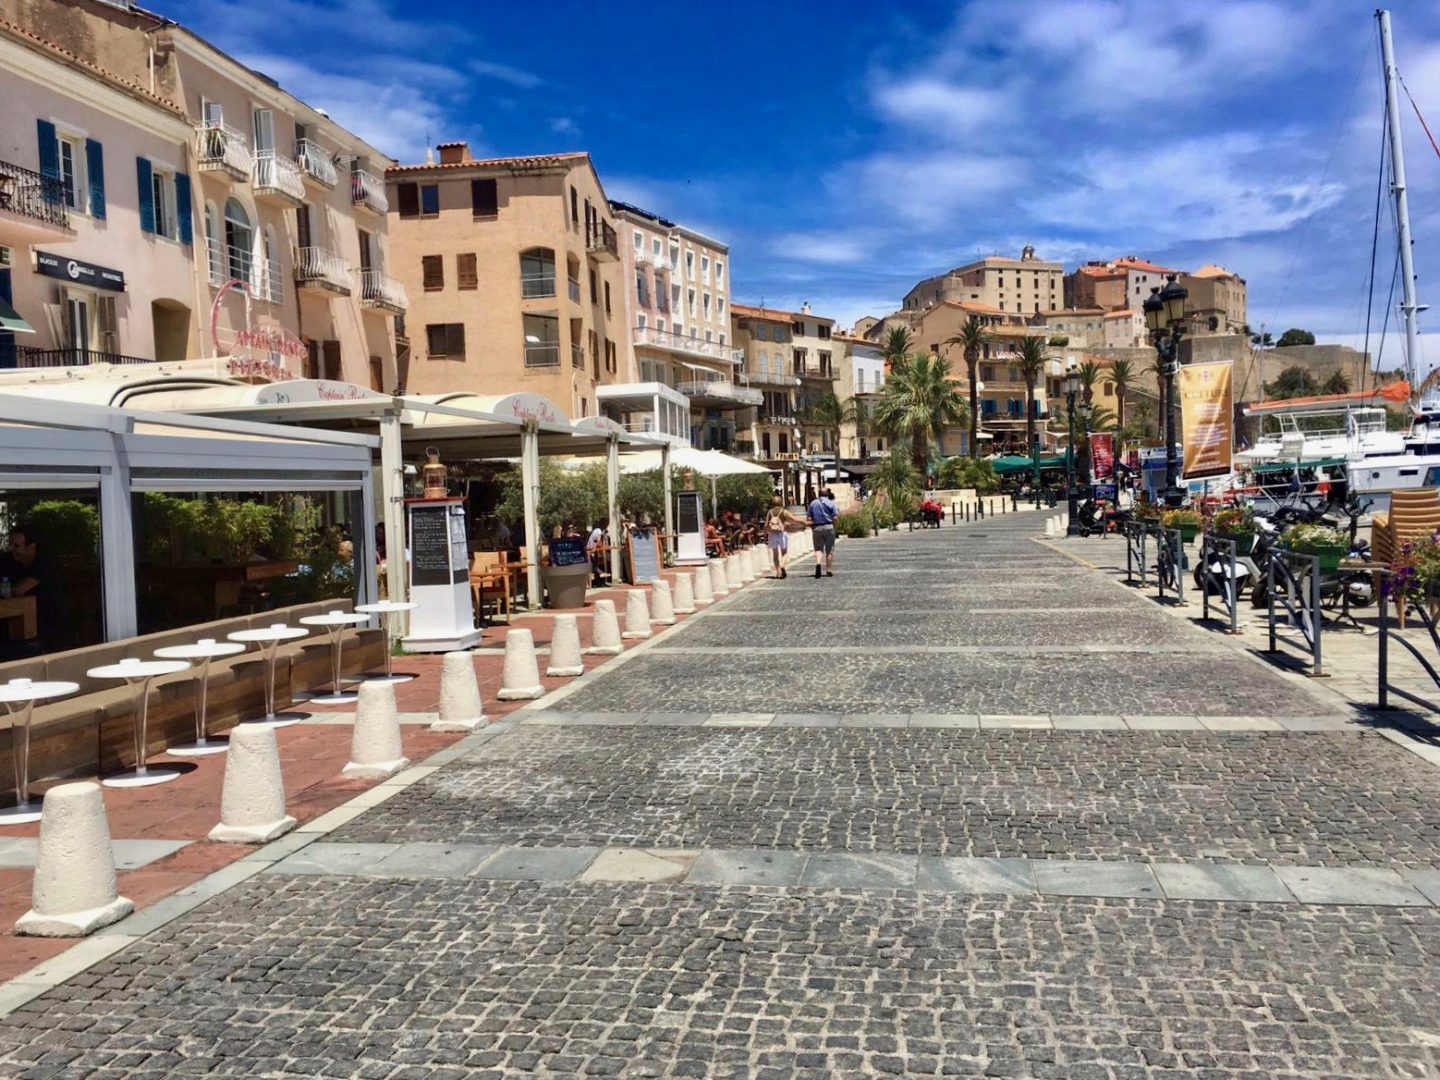 The port of Calvi, showing a cobbled street with boats on one side and restaurants on the other. What to expect on the Gr20